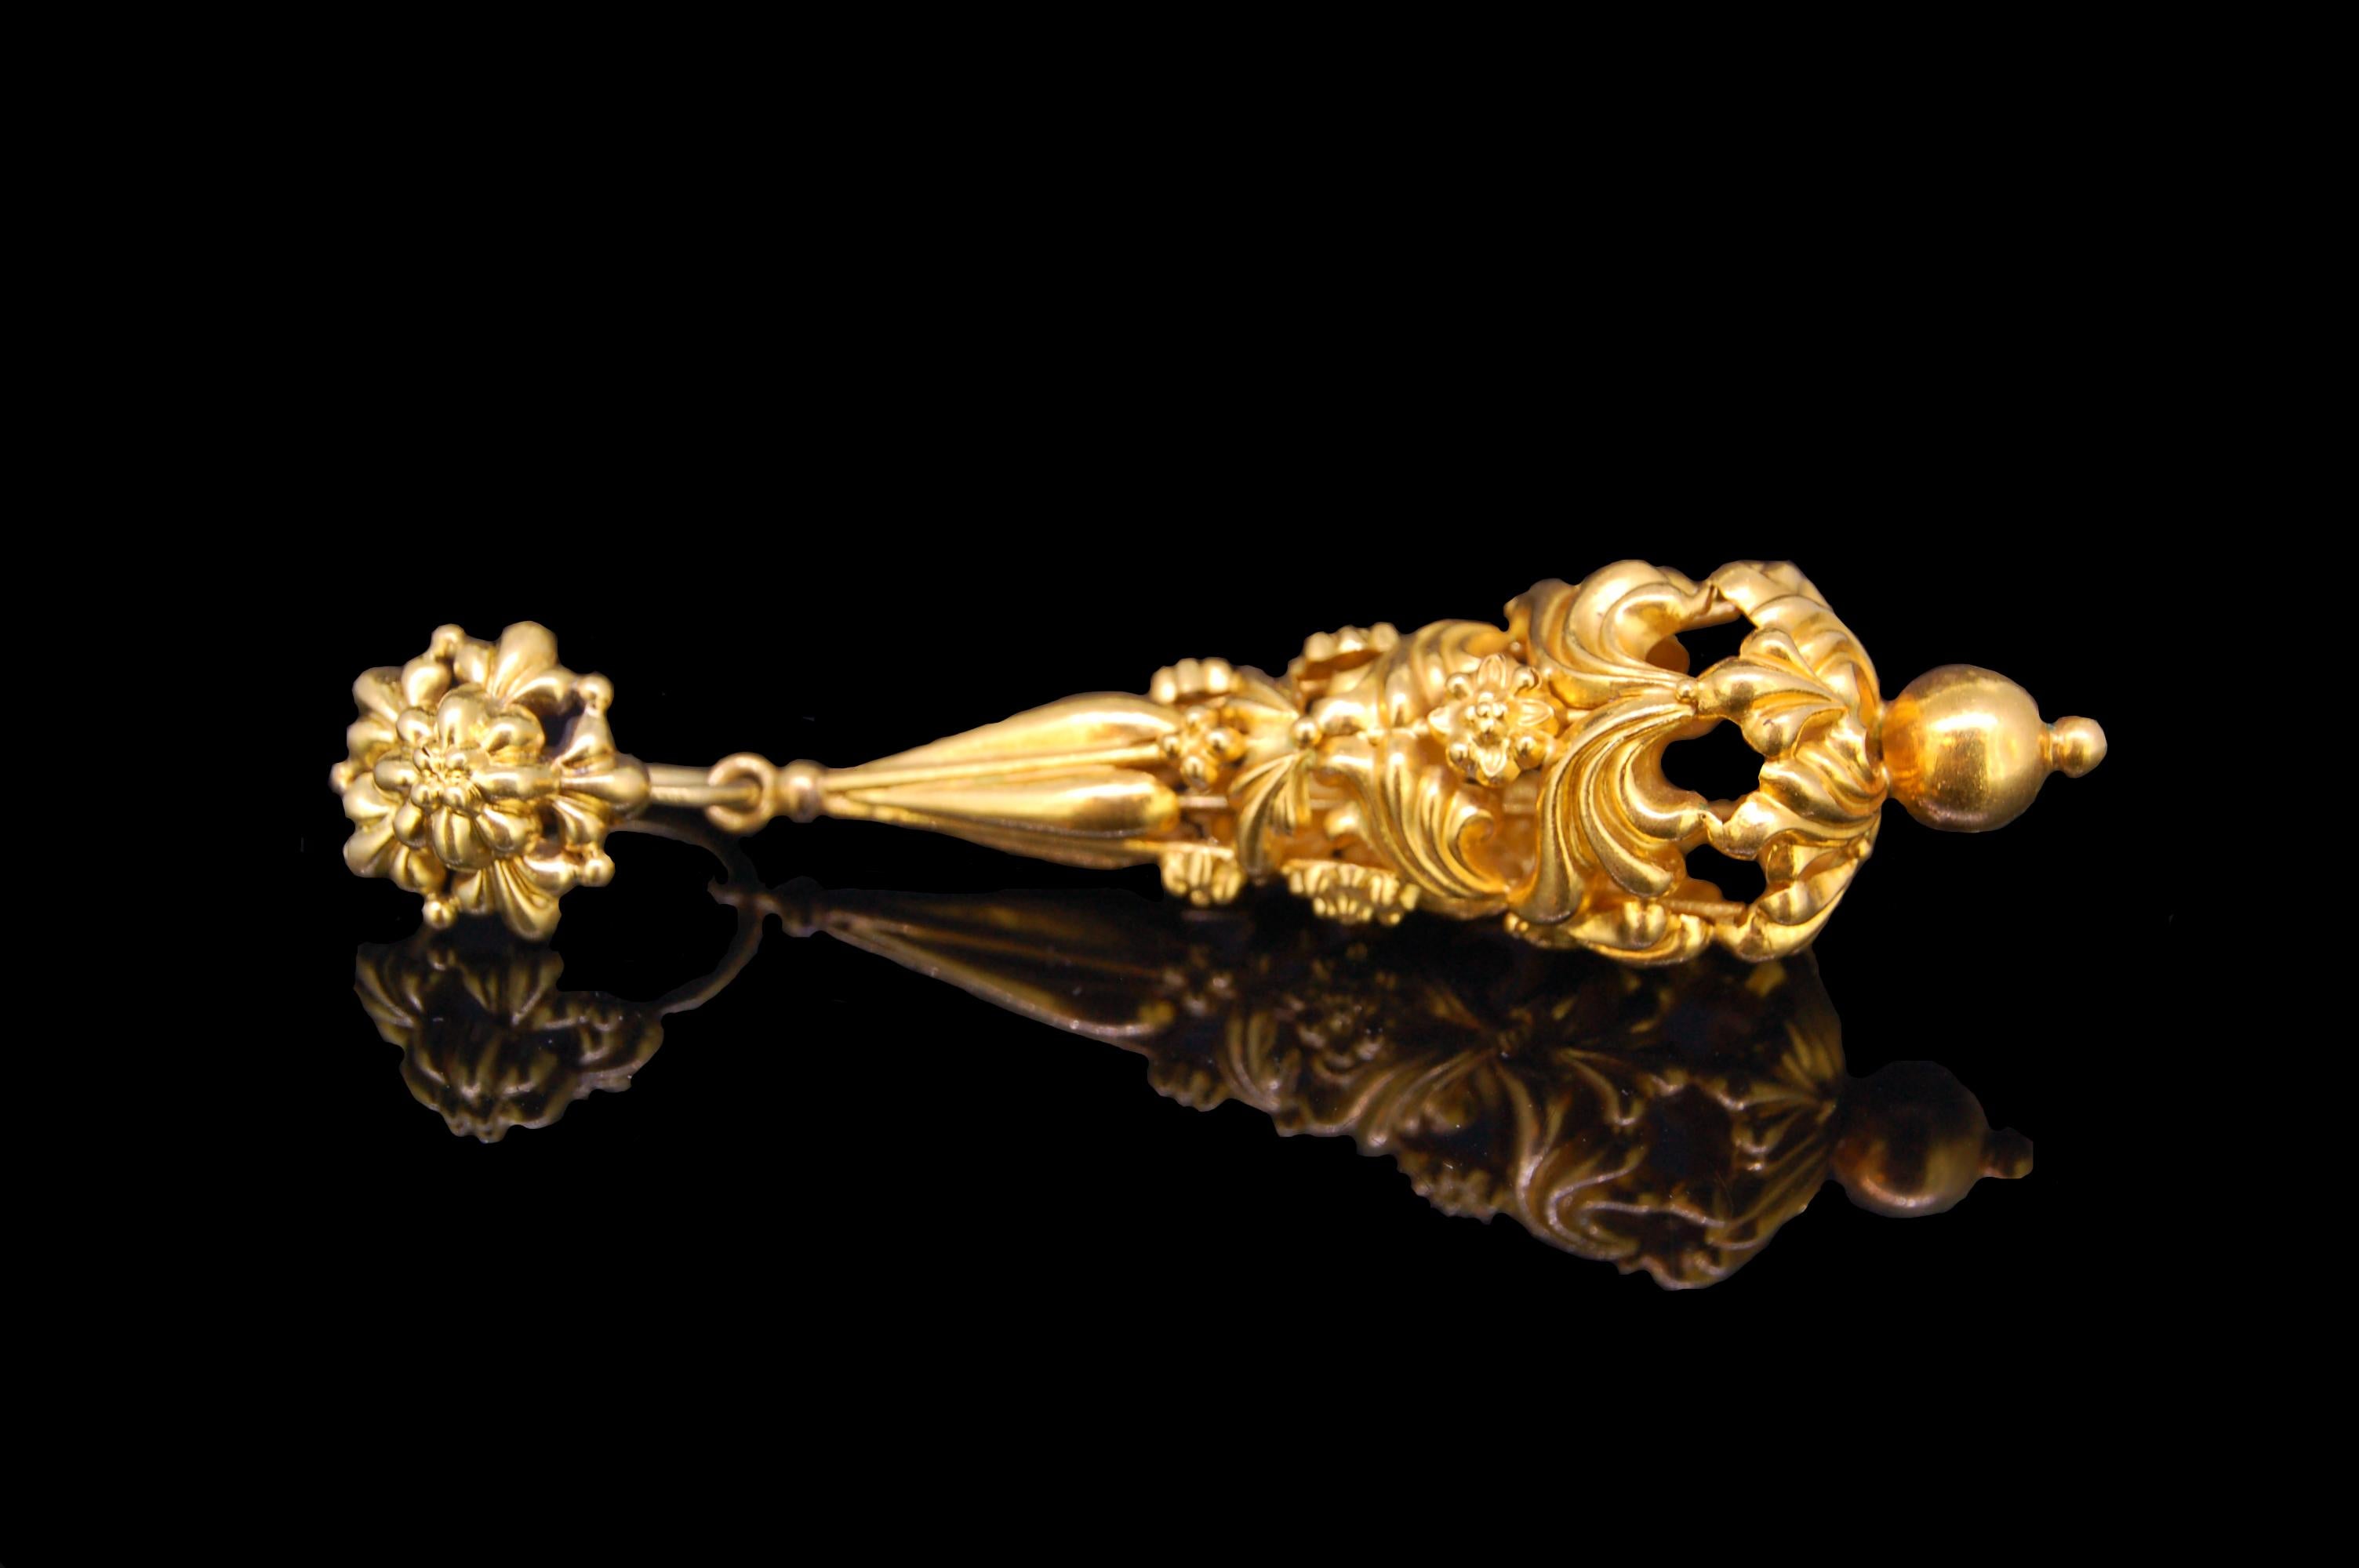 ANTIQUE PAIR OF DROP EARRINGS, yellow precious metal, the bottom of the drop with openwork floral motifs, suspending from a stylized flowerhead top. L. 7.6 cm. 13 grams.